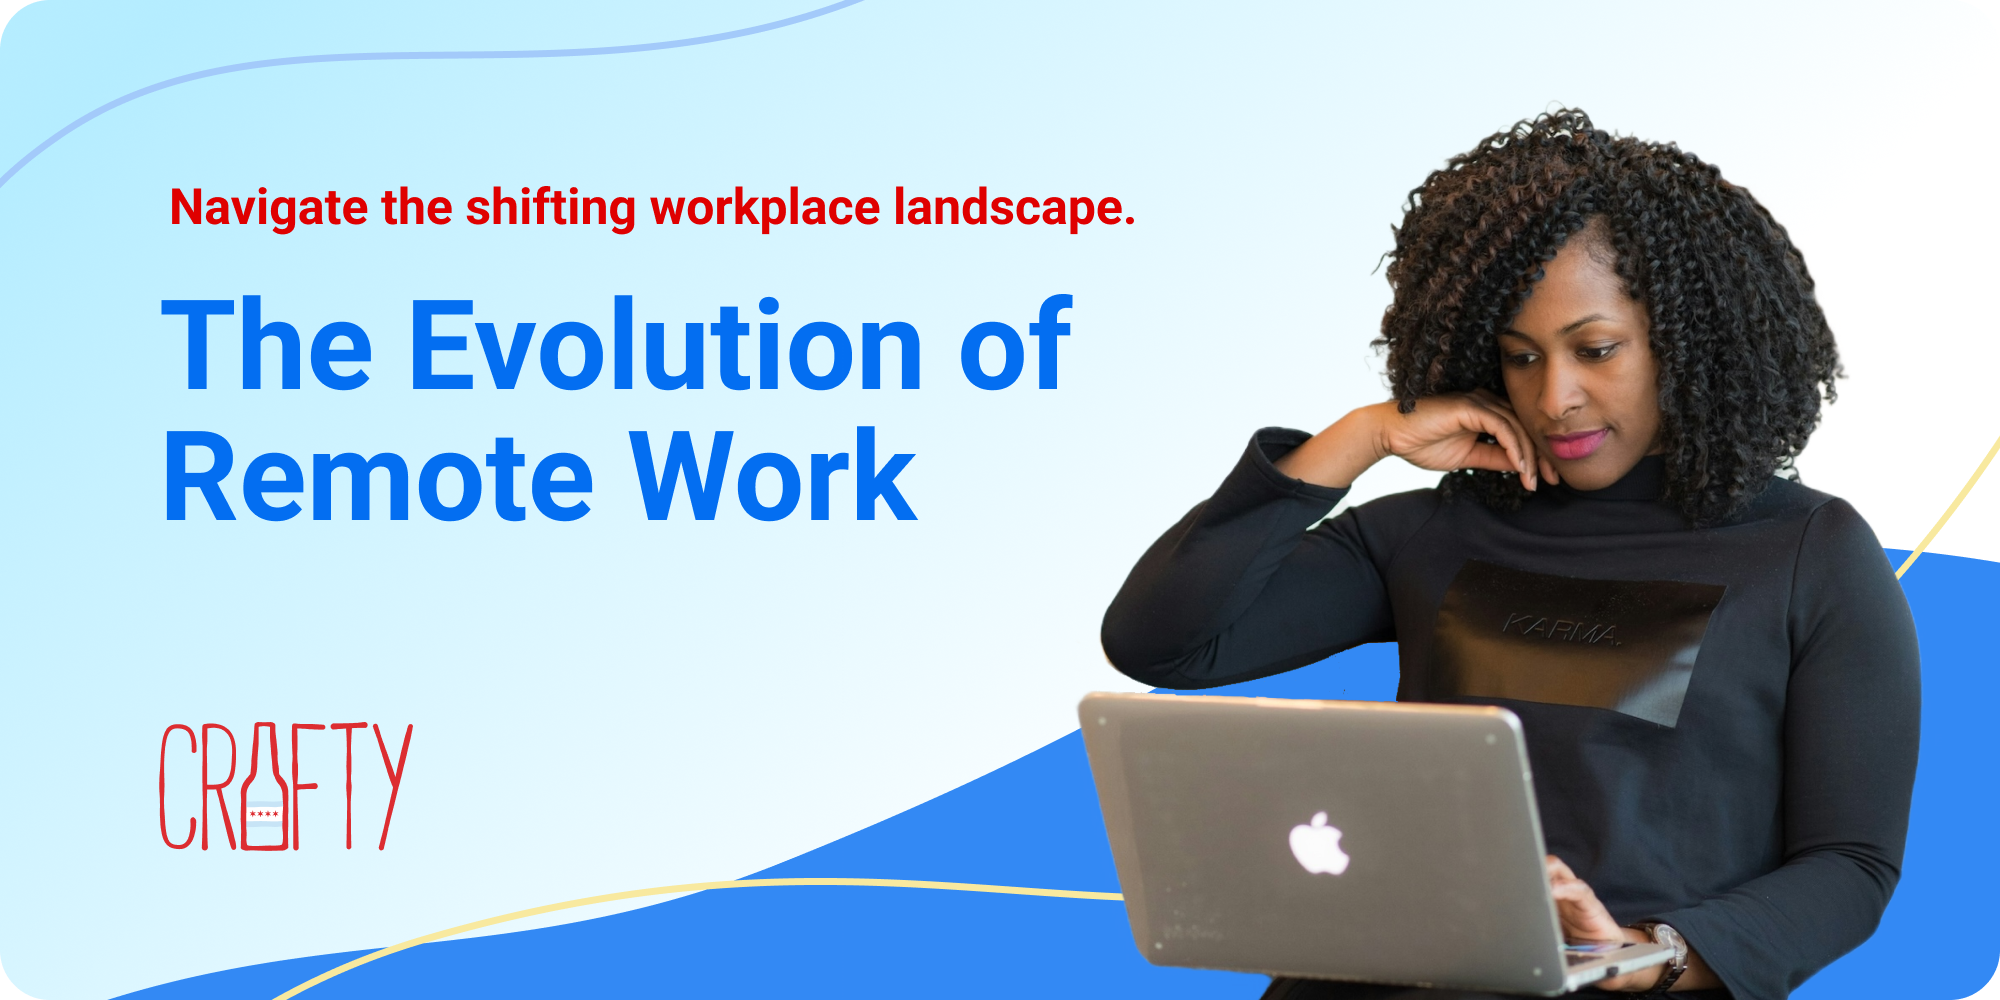 The Evolution of Remote Work